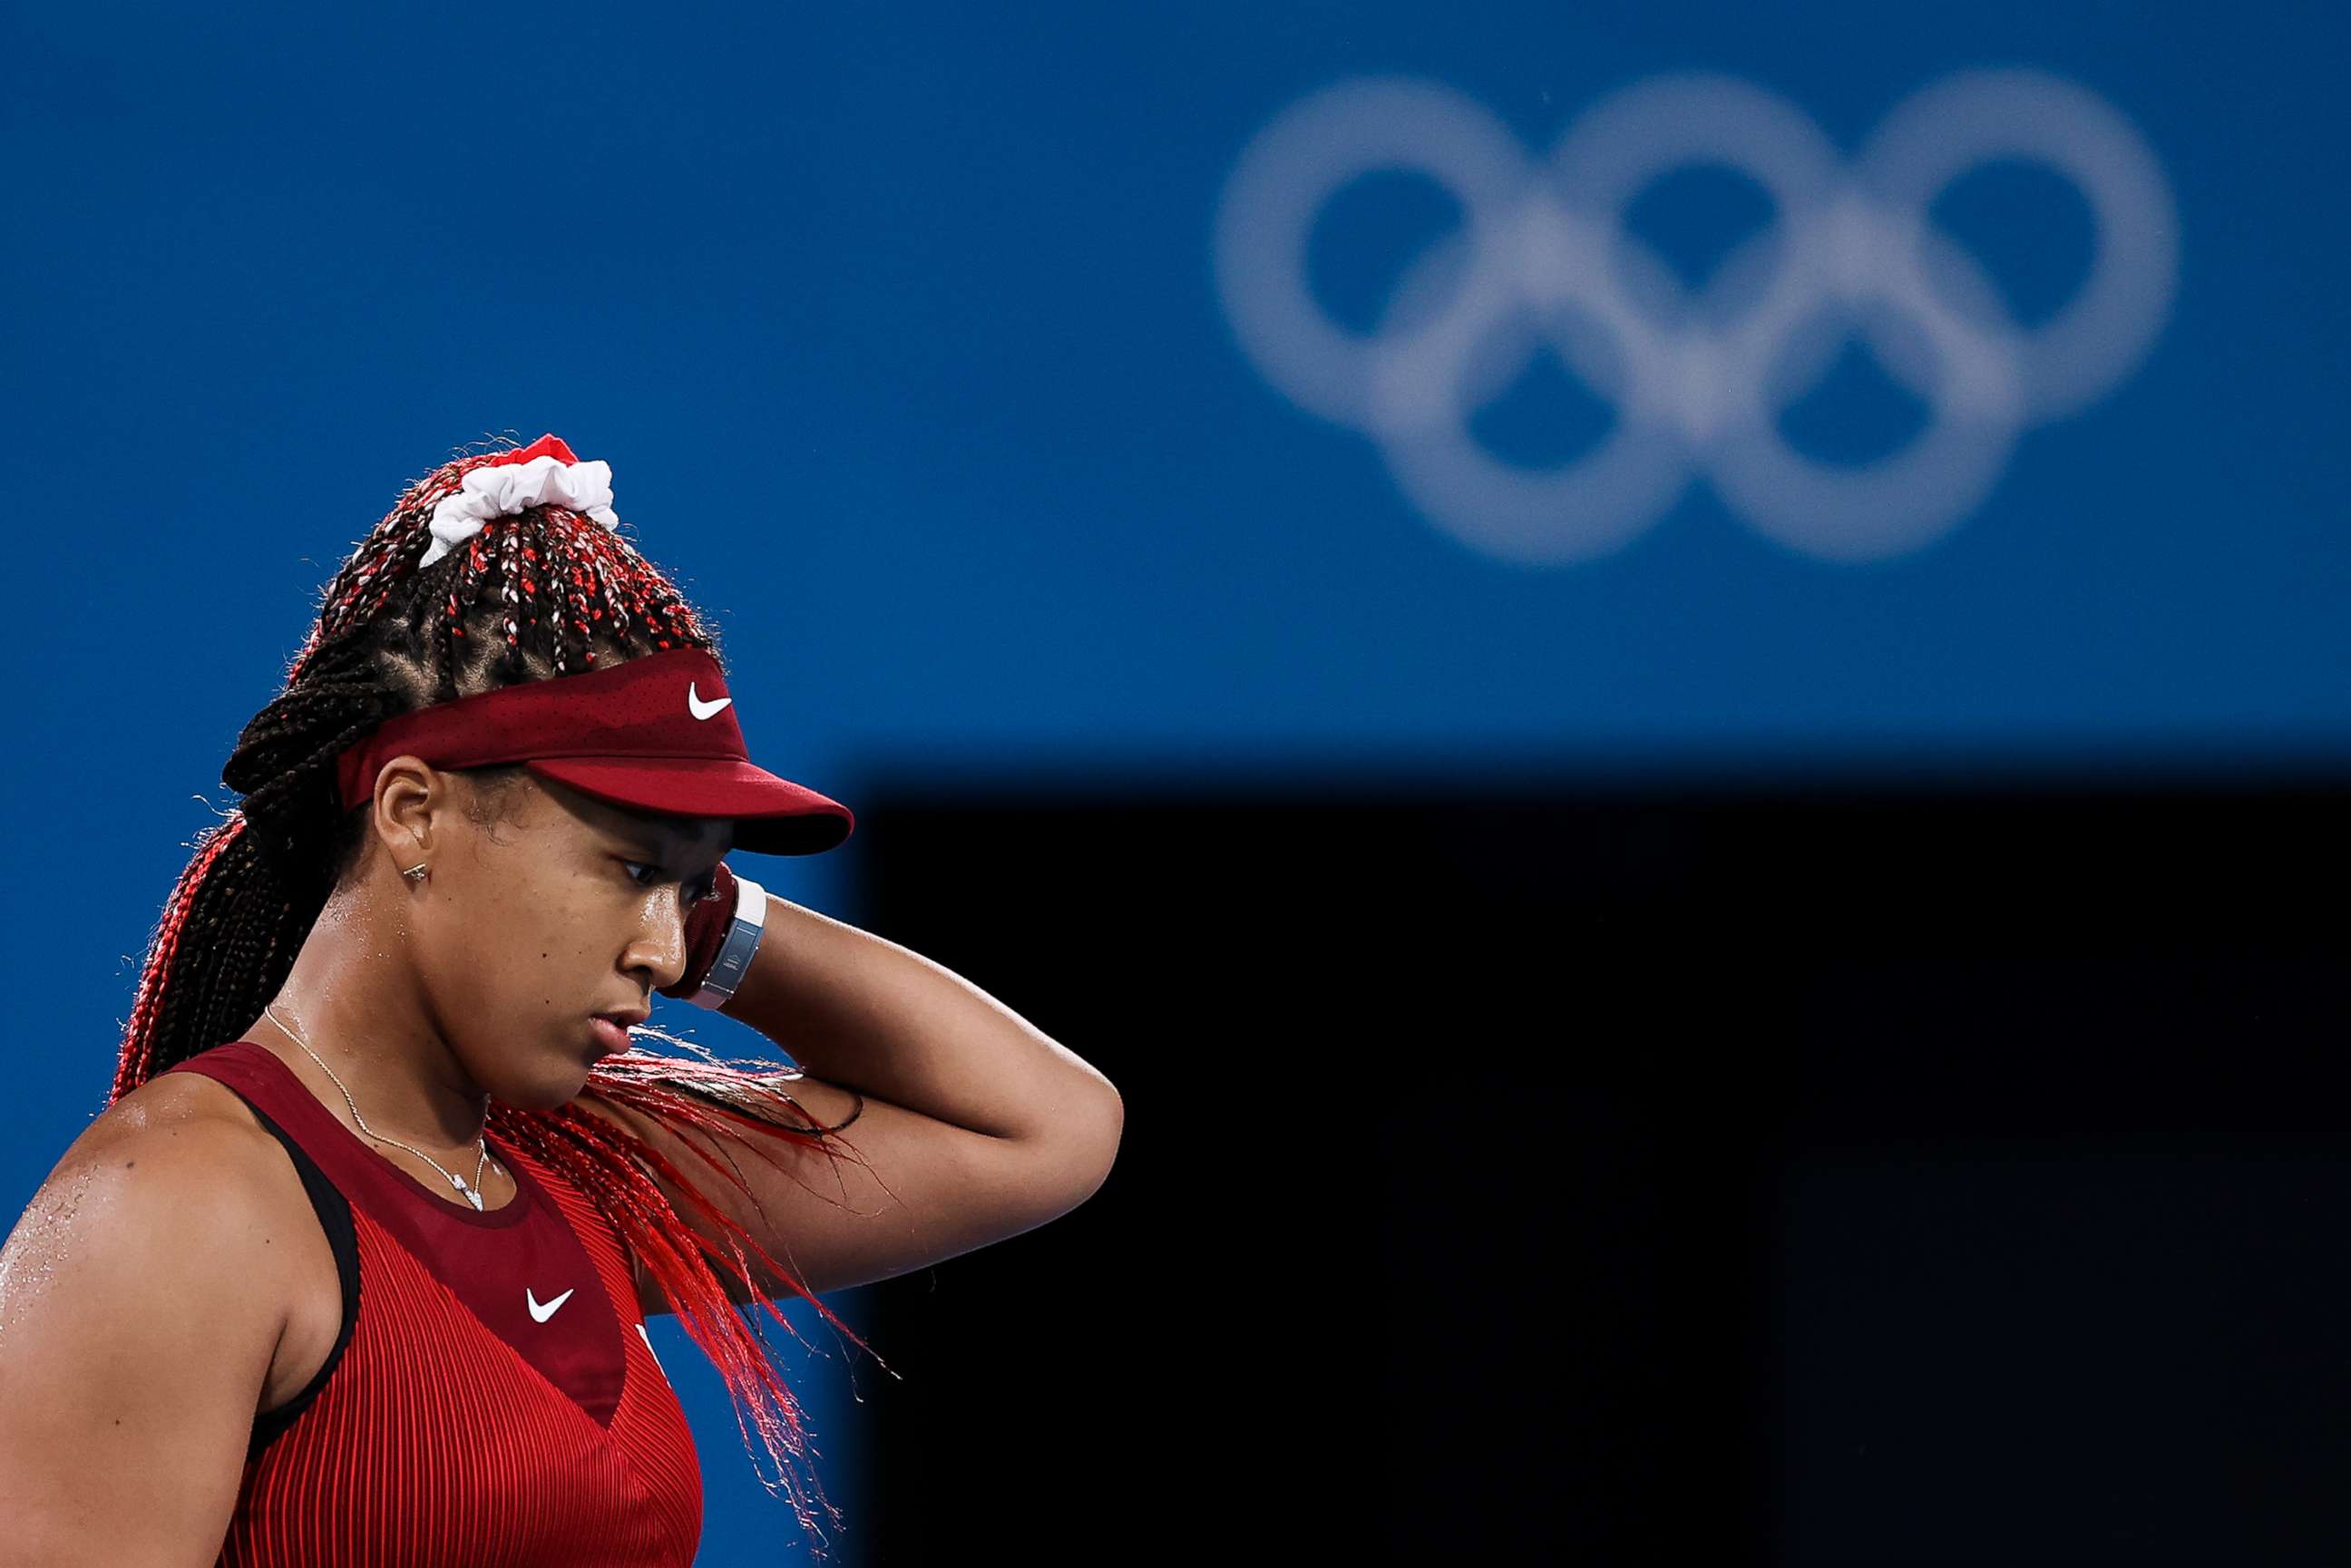 PHOTO: Naomi Osaka of Team Japan reacts after a point during her Women's Singles Third Round match against Marketa Vondrousova of Team Czech Republic on day four of the Tokyo 2020 Olympic Games at Ariake Tennis Park, July 27, 2021, in Tokyo.